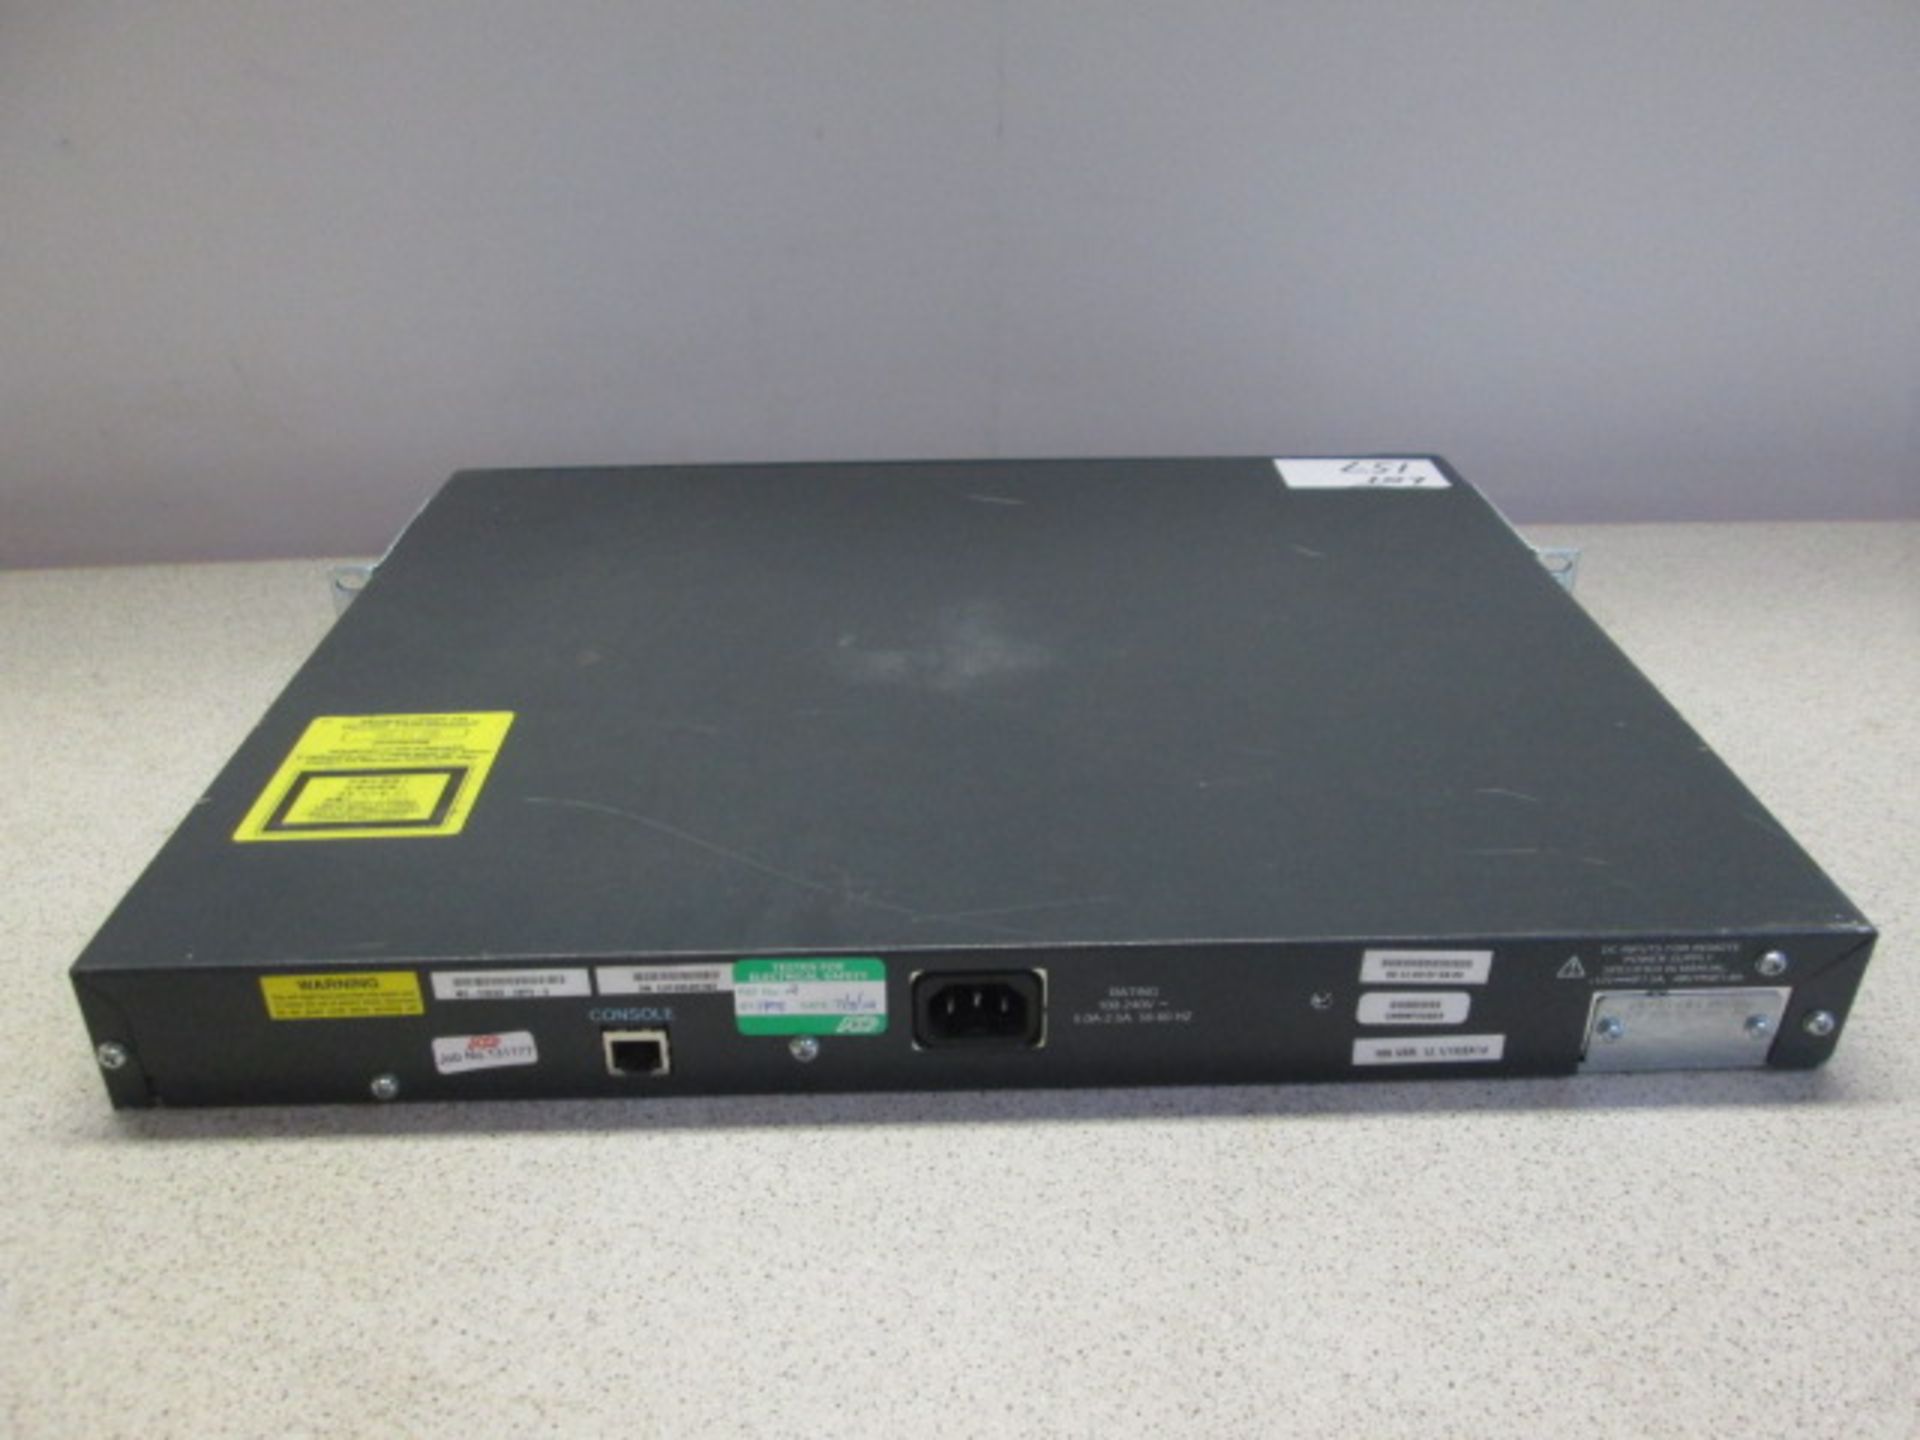 Cisco System 48 Port Switch, Model Catalyst 3560. Comes with Power Supply - Image 5 of 5